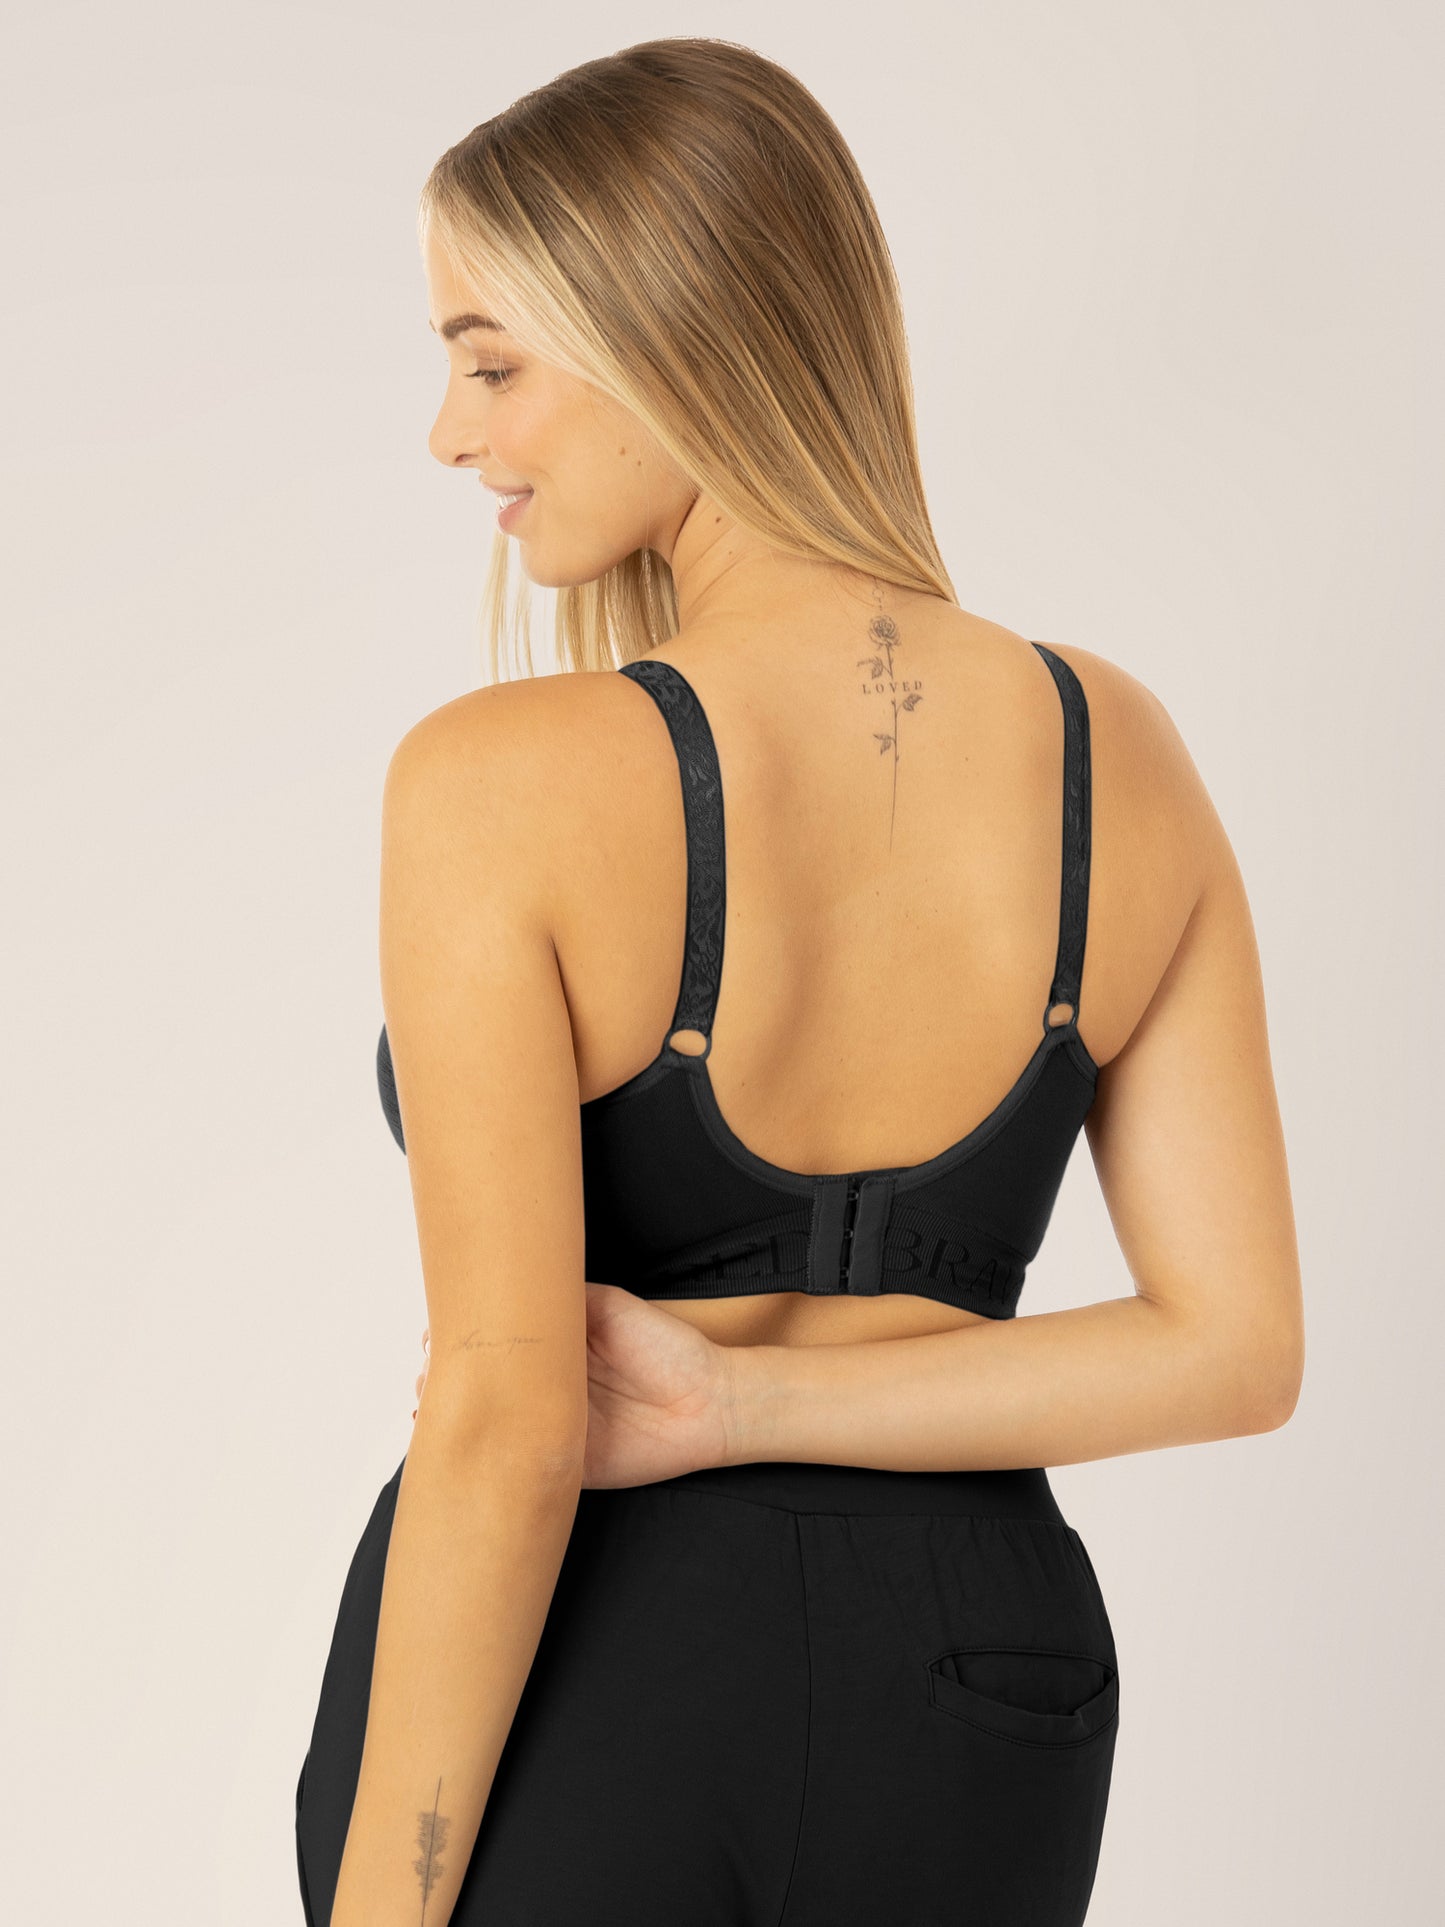 Back view of a model wearing the Sublime® Hands-Free Pumping & Nursing Bra in Black